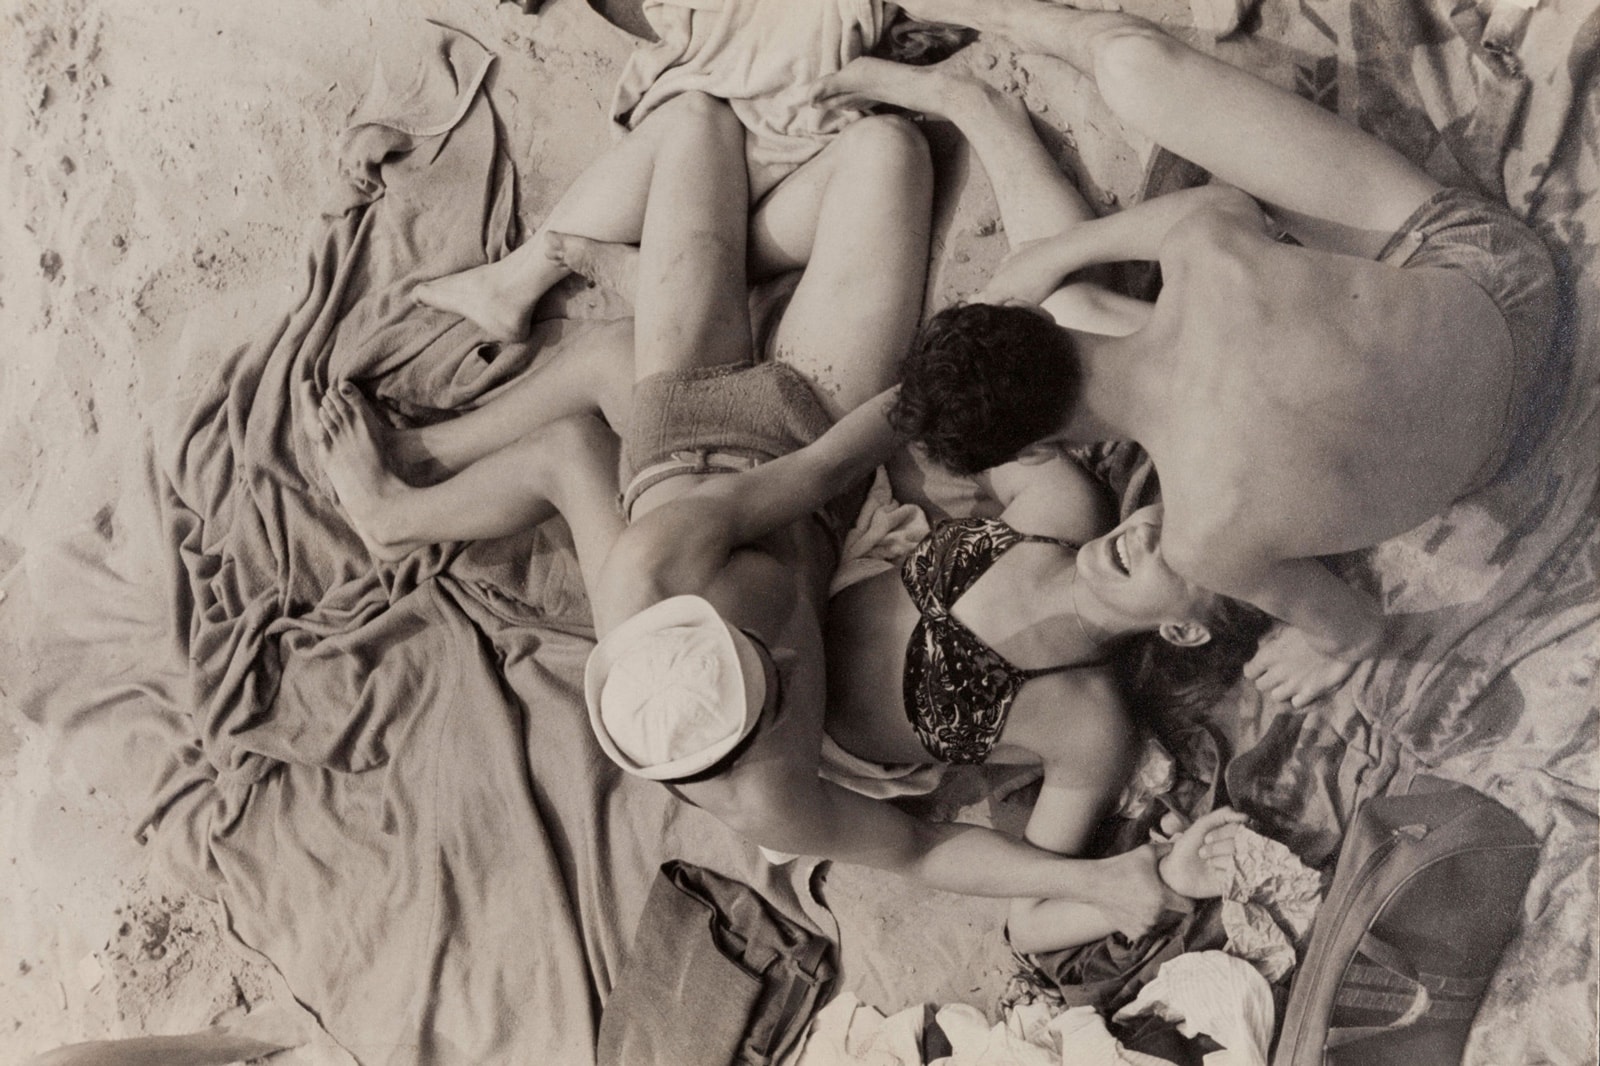 MoMA Will Auction More Than 400 Photographs